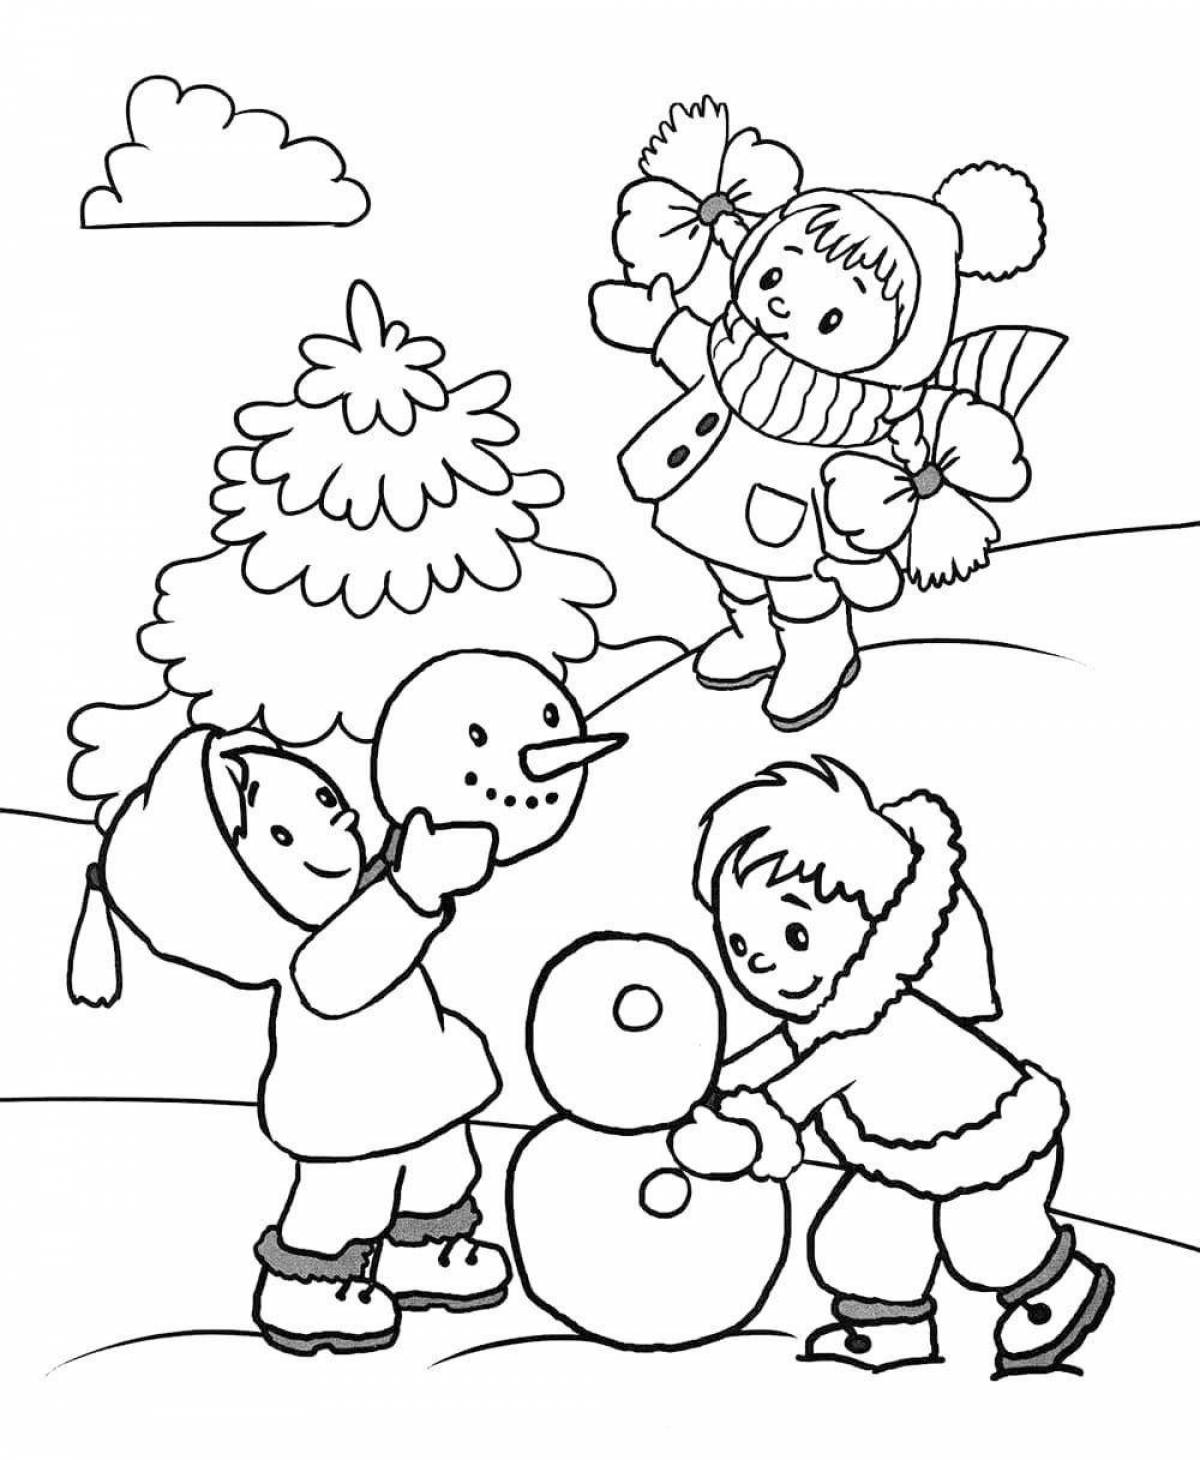 Dazzling Christmas coloring games